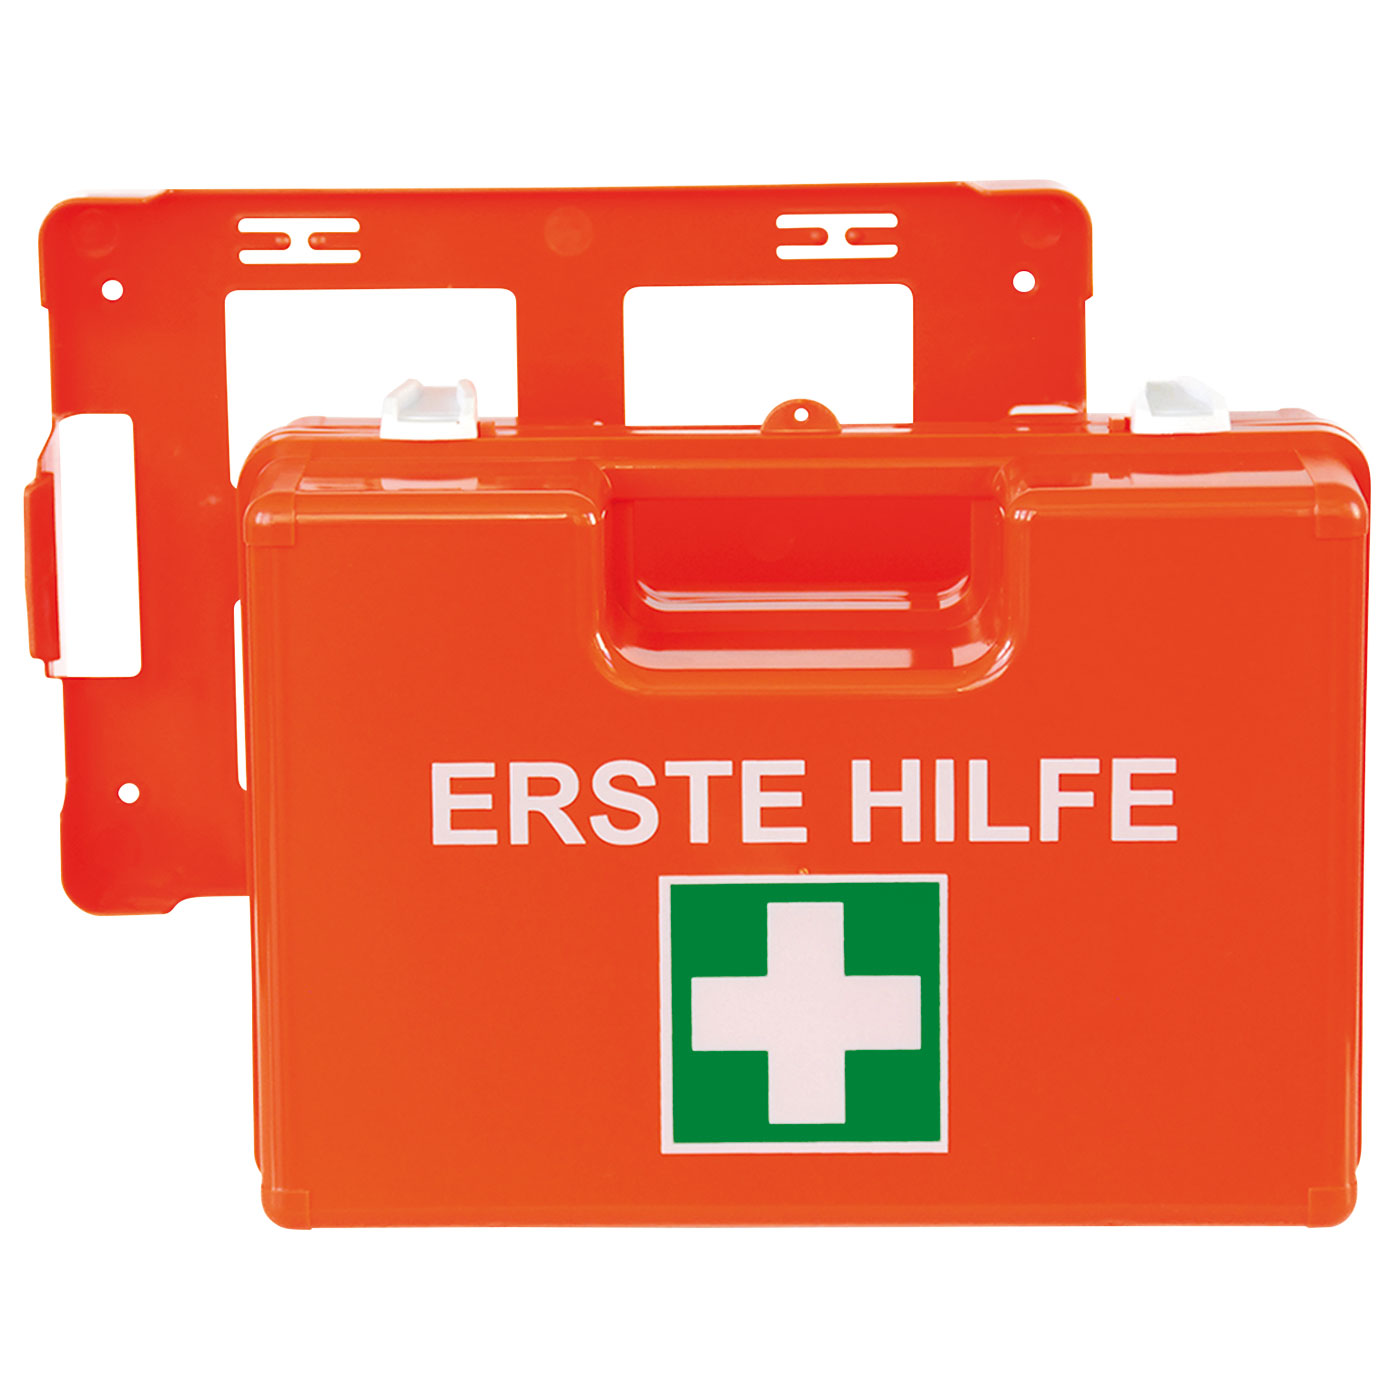 https://www.hele.de/eShop/out/pictures/master/product/1/9284625.jpg